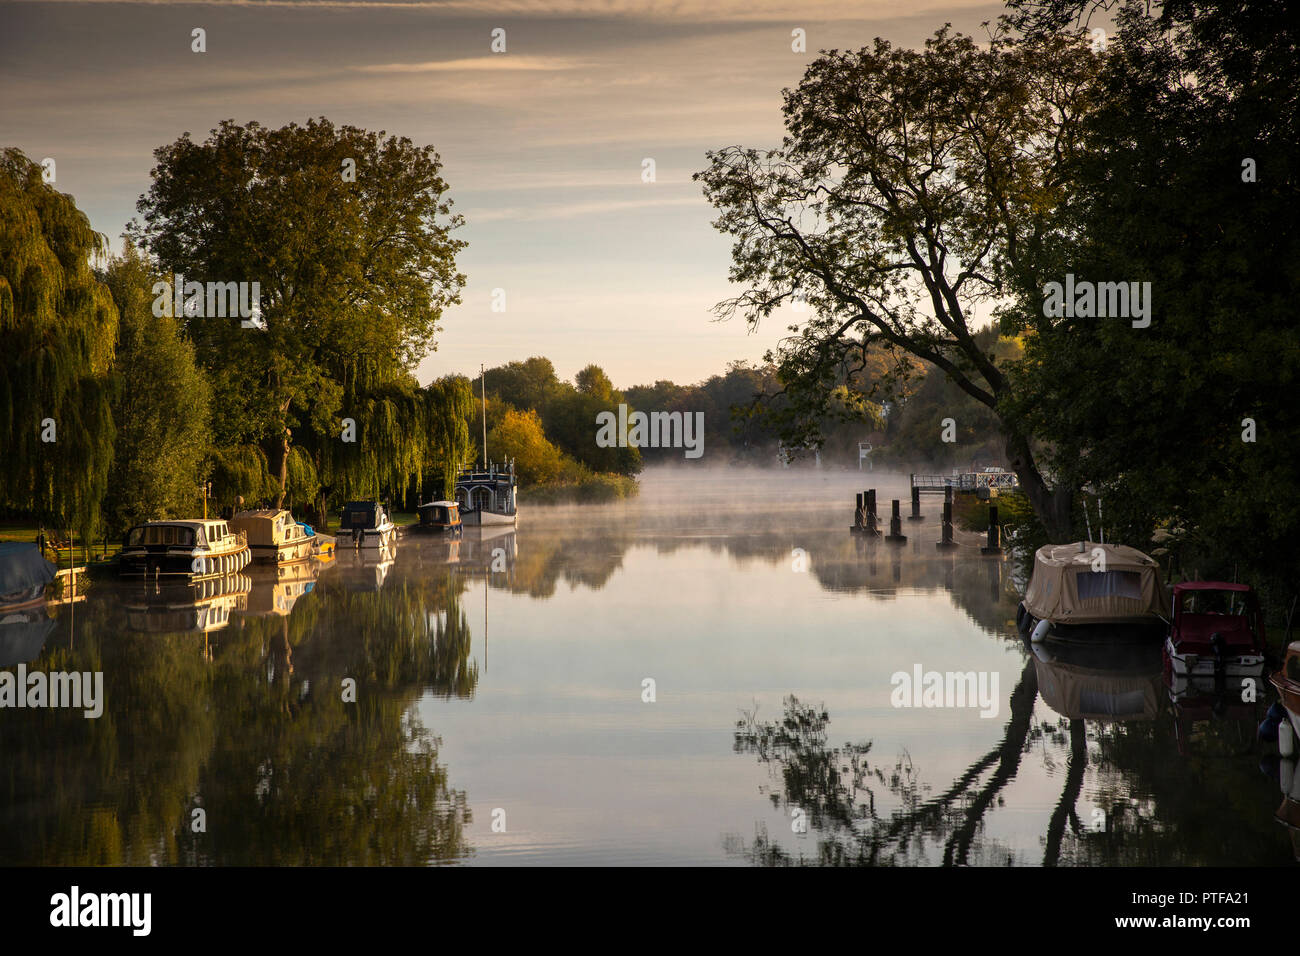 England, Berkshire, Streatley, early morning mist on River Thames outside Swan Hotel Stock Photo